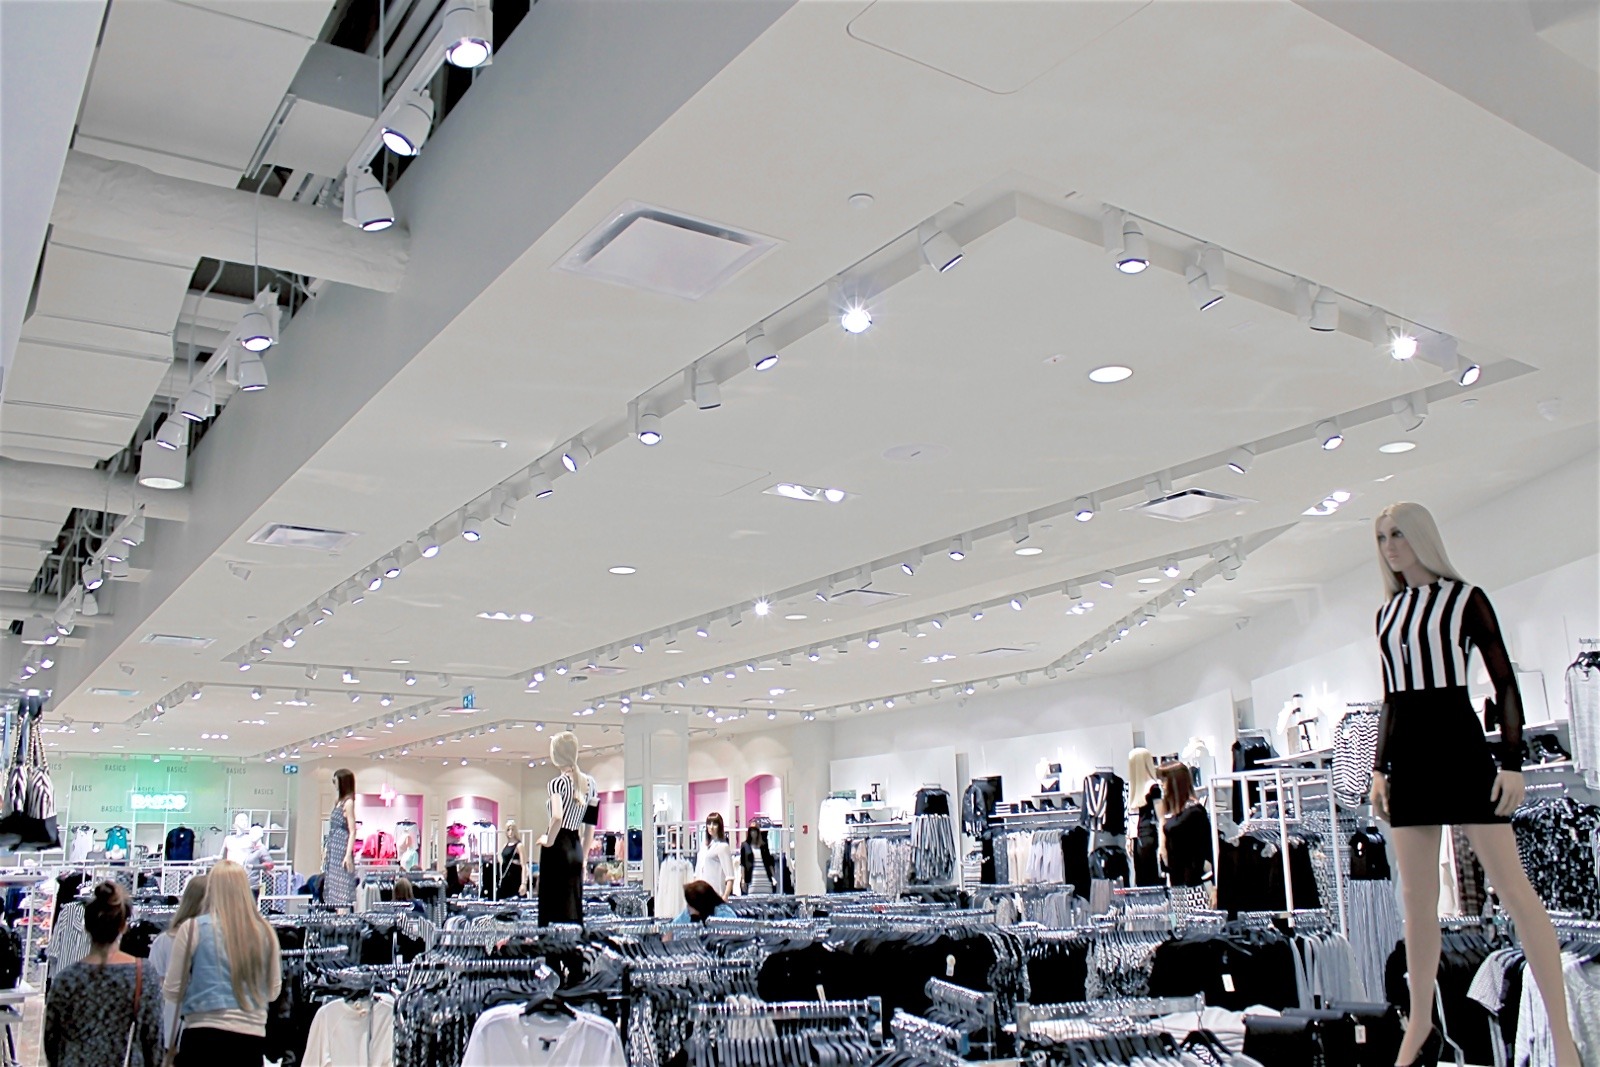 Robertson-Walls-Ceilings-Completed-Projects-Luxury-Retail-Forever21-4 FOREVER 21 GUILFORD TOWN CENTER AND METROTOWN